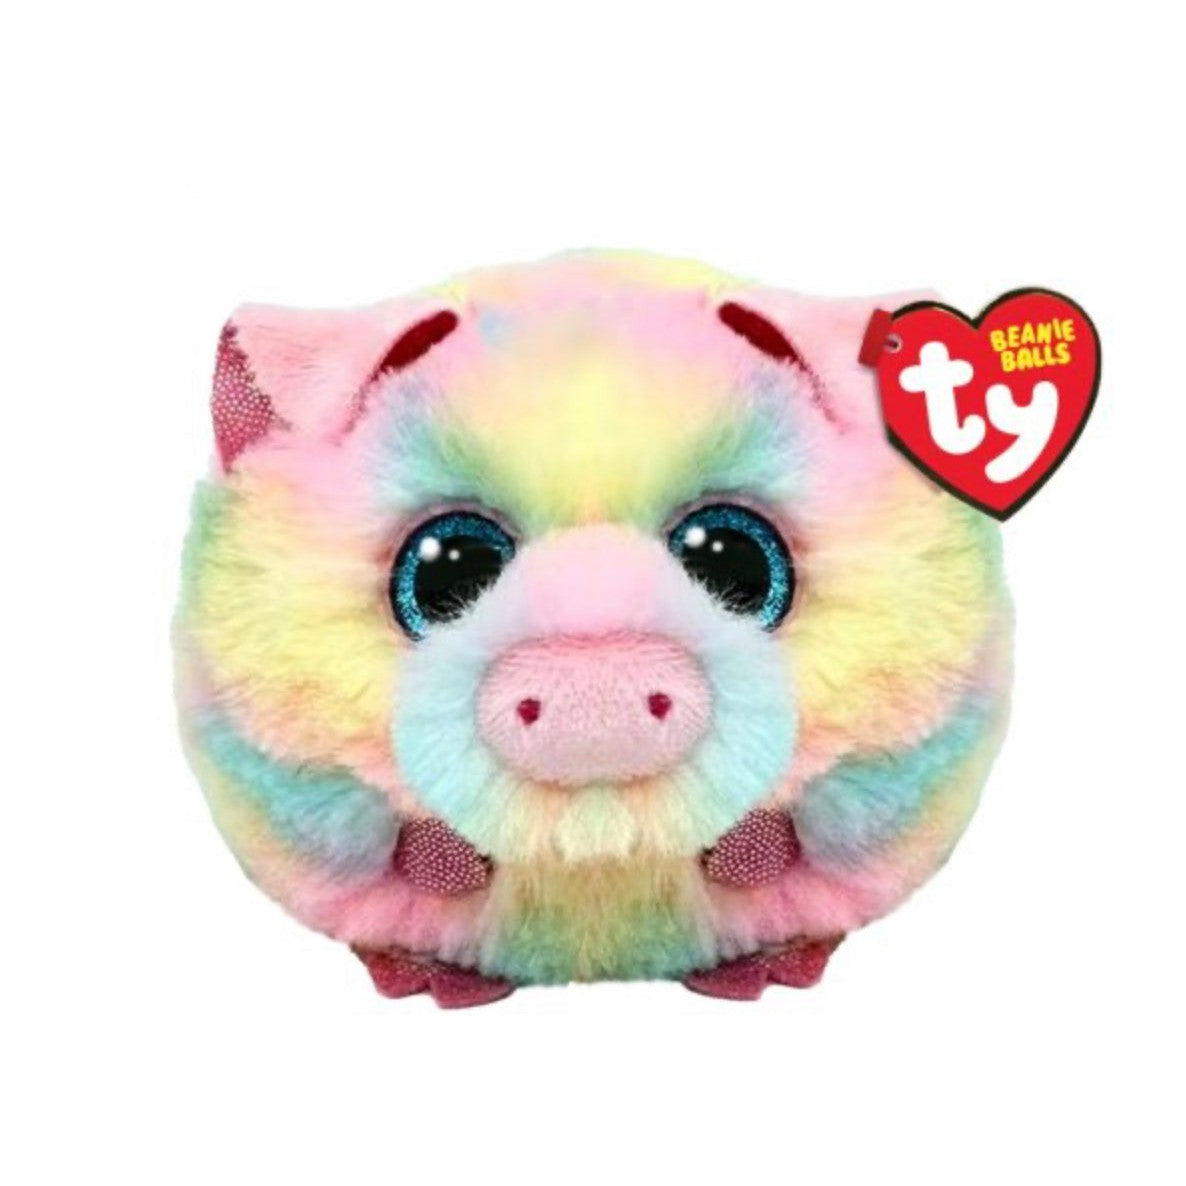 Ty Beanie Ball - Pigasso the pastel pig - 4"-TY Inc-Little Giant Kidz